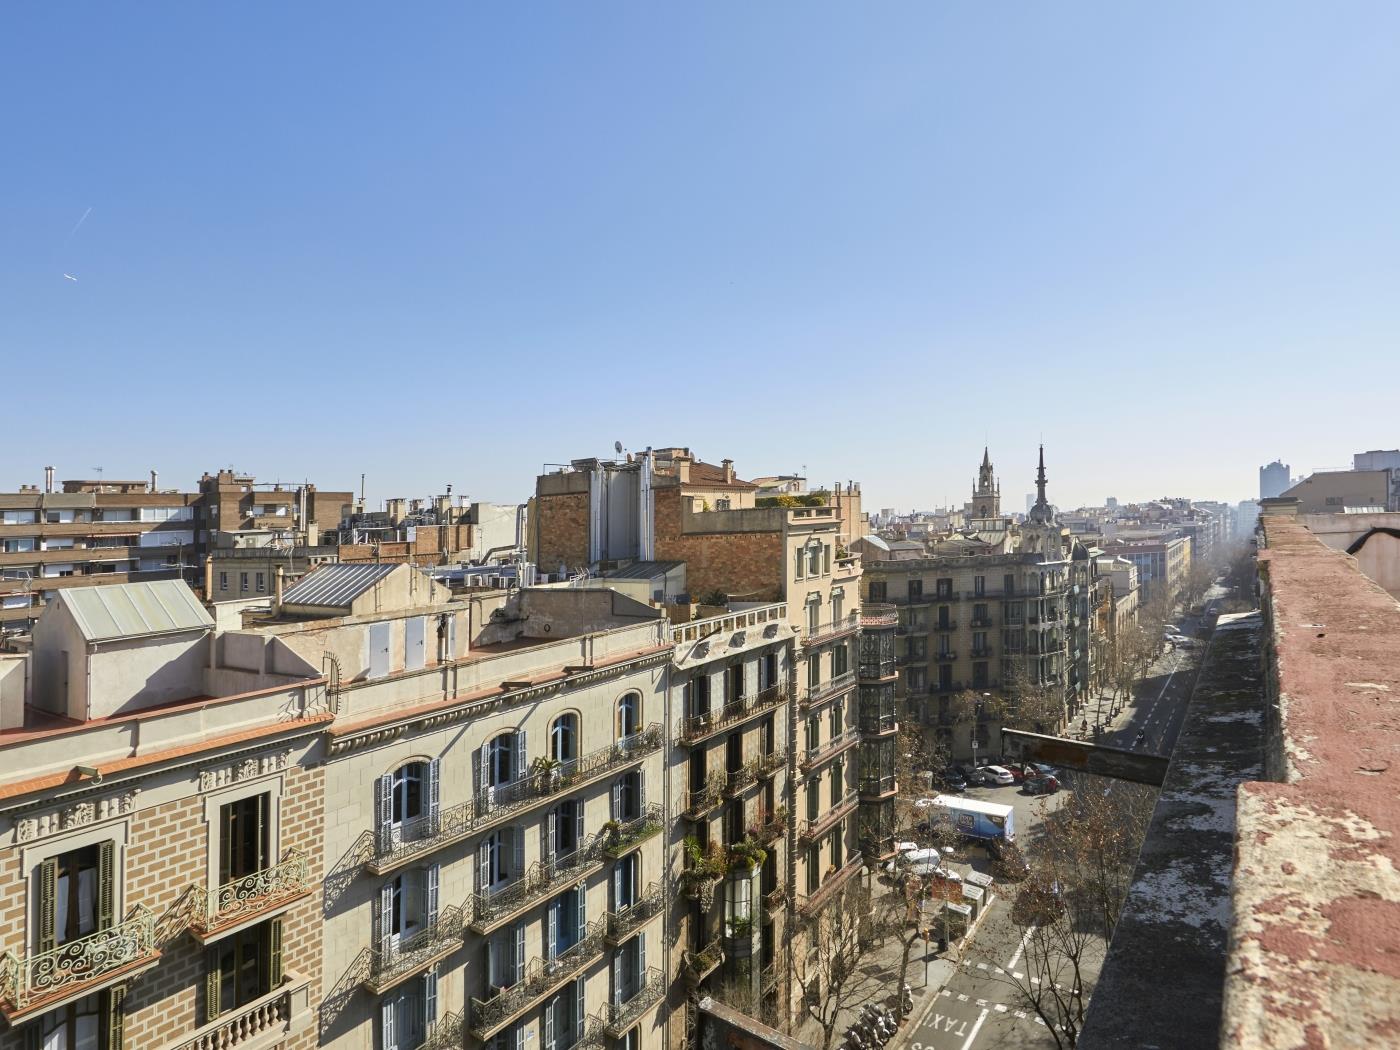 FOR SALE: Bright and renovated penthouse in the Eixample - Price 579.000 € - My Space Barcelona Apartments